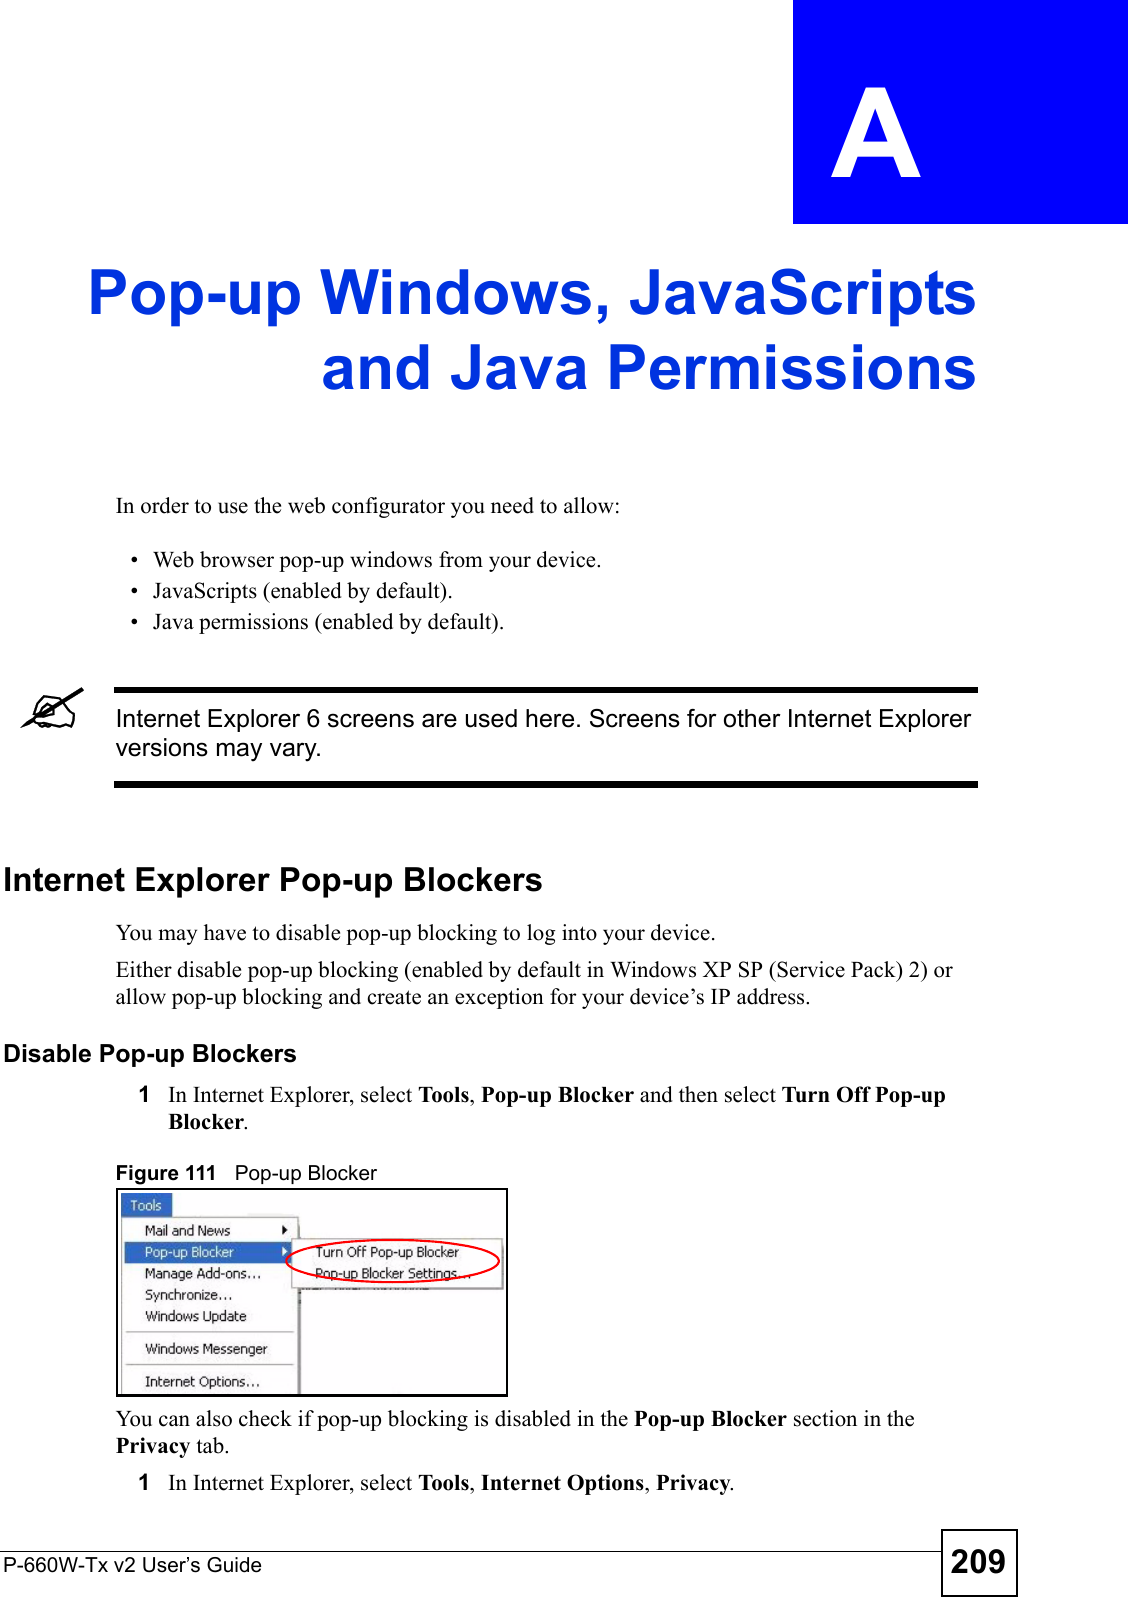 P-660W-Tx v2 User’s Guide 209APPENDIX  A Pop-up Windows, JavaScriptsand Java PermissionsIn order to use the web configurator you need to allow:• Web browser pop-up windows from your device.• JavaScripts (enabled by default).• Java permissions (enabled by default).&quot;Internet Explorer 6 screens are used here. Screens for other Internet Explorer versions may vary.Internet Explorer Pop-up BlockersYou may have to disable pop-up blocking to log into your device. Either disable pop-up blocking (enabled by default in Windows XP SP (Service Pack) 2) or allow pop-up blocking and create an exception for your device’s IP address.Disable Pop-up Blockers1In Internet Explorer, select Tools, Pop-up Blocker and then select Turn Off Pop-up Blocker. Figure 111   Pop-up BlockerYou can also check if pop-up blocking is disabled in the Pop-up Blocker section in the Privacy tab. 1In Internet Explorer, select Tools, Internet Options, Privacy.